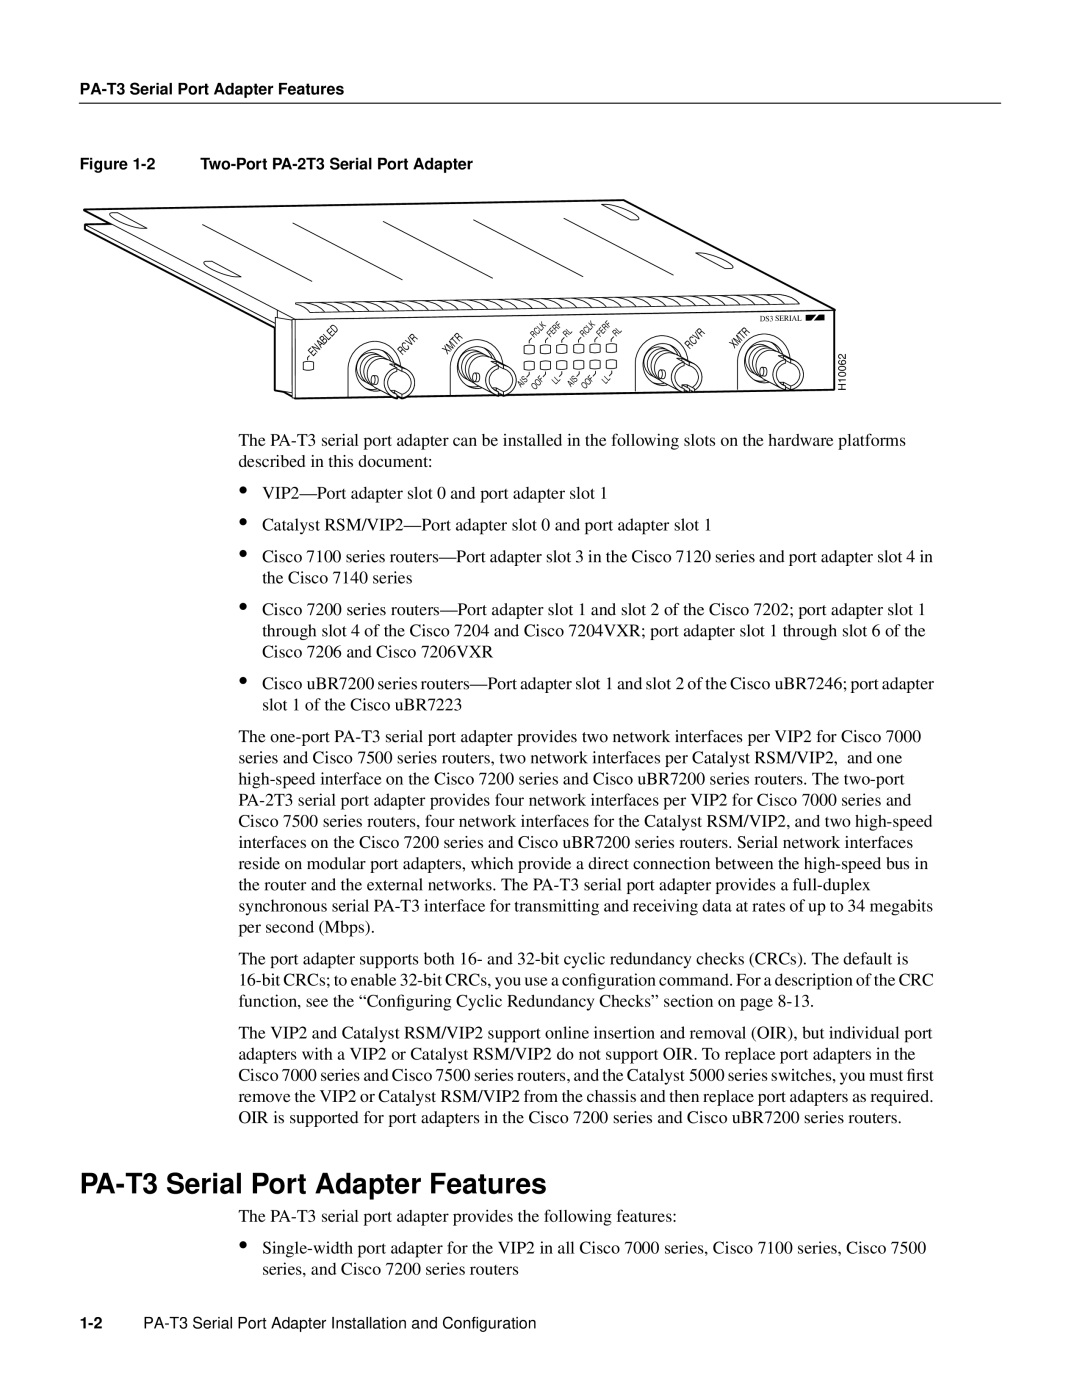 Cisco Systems manual PA-T3 Serial Port Adapter Features 